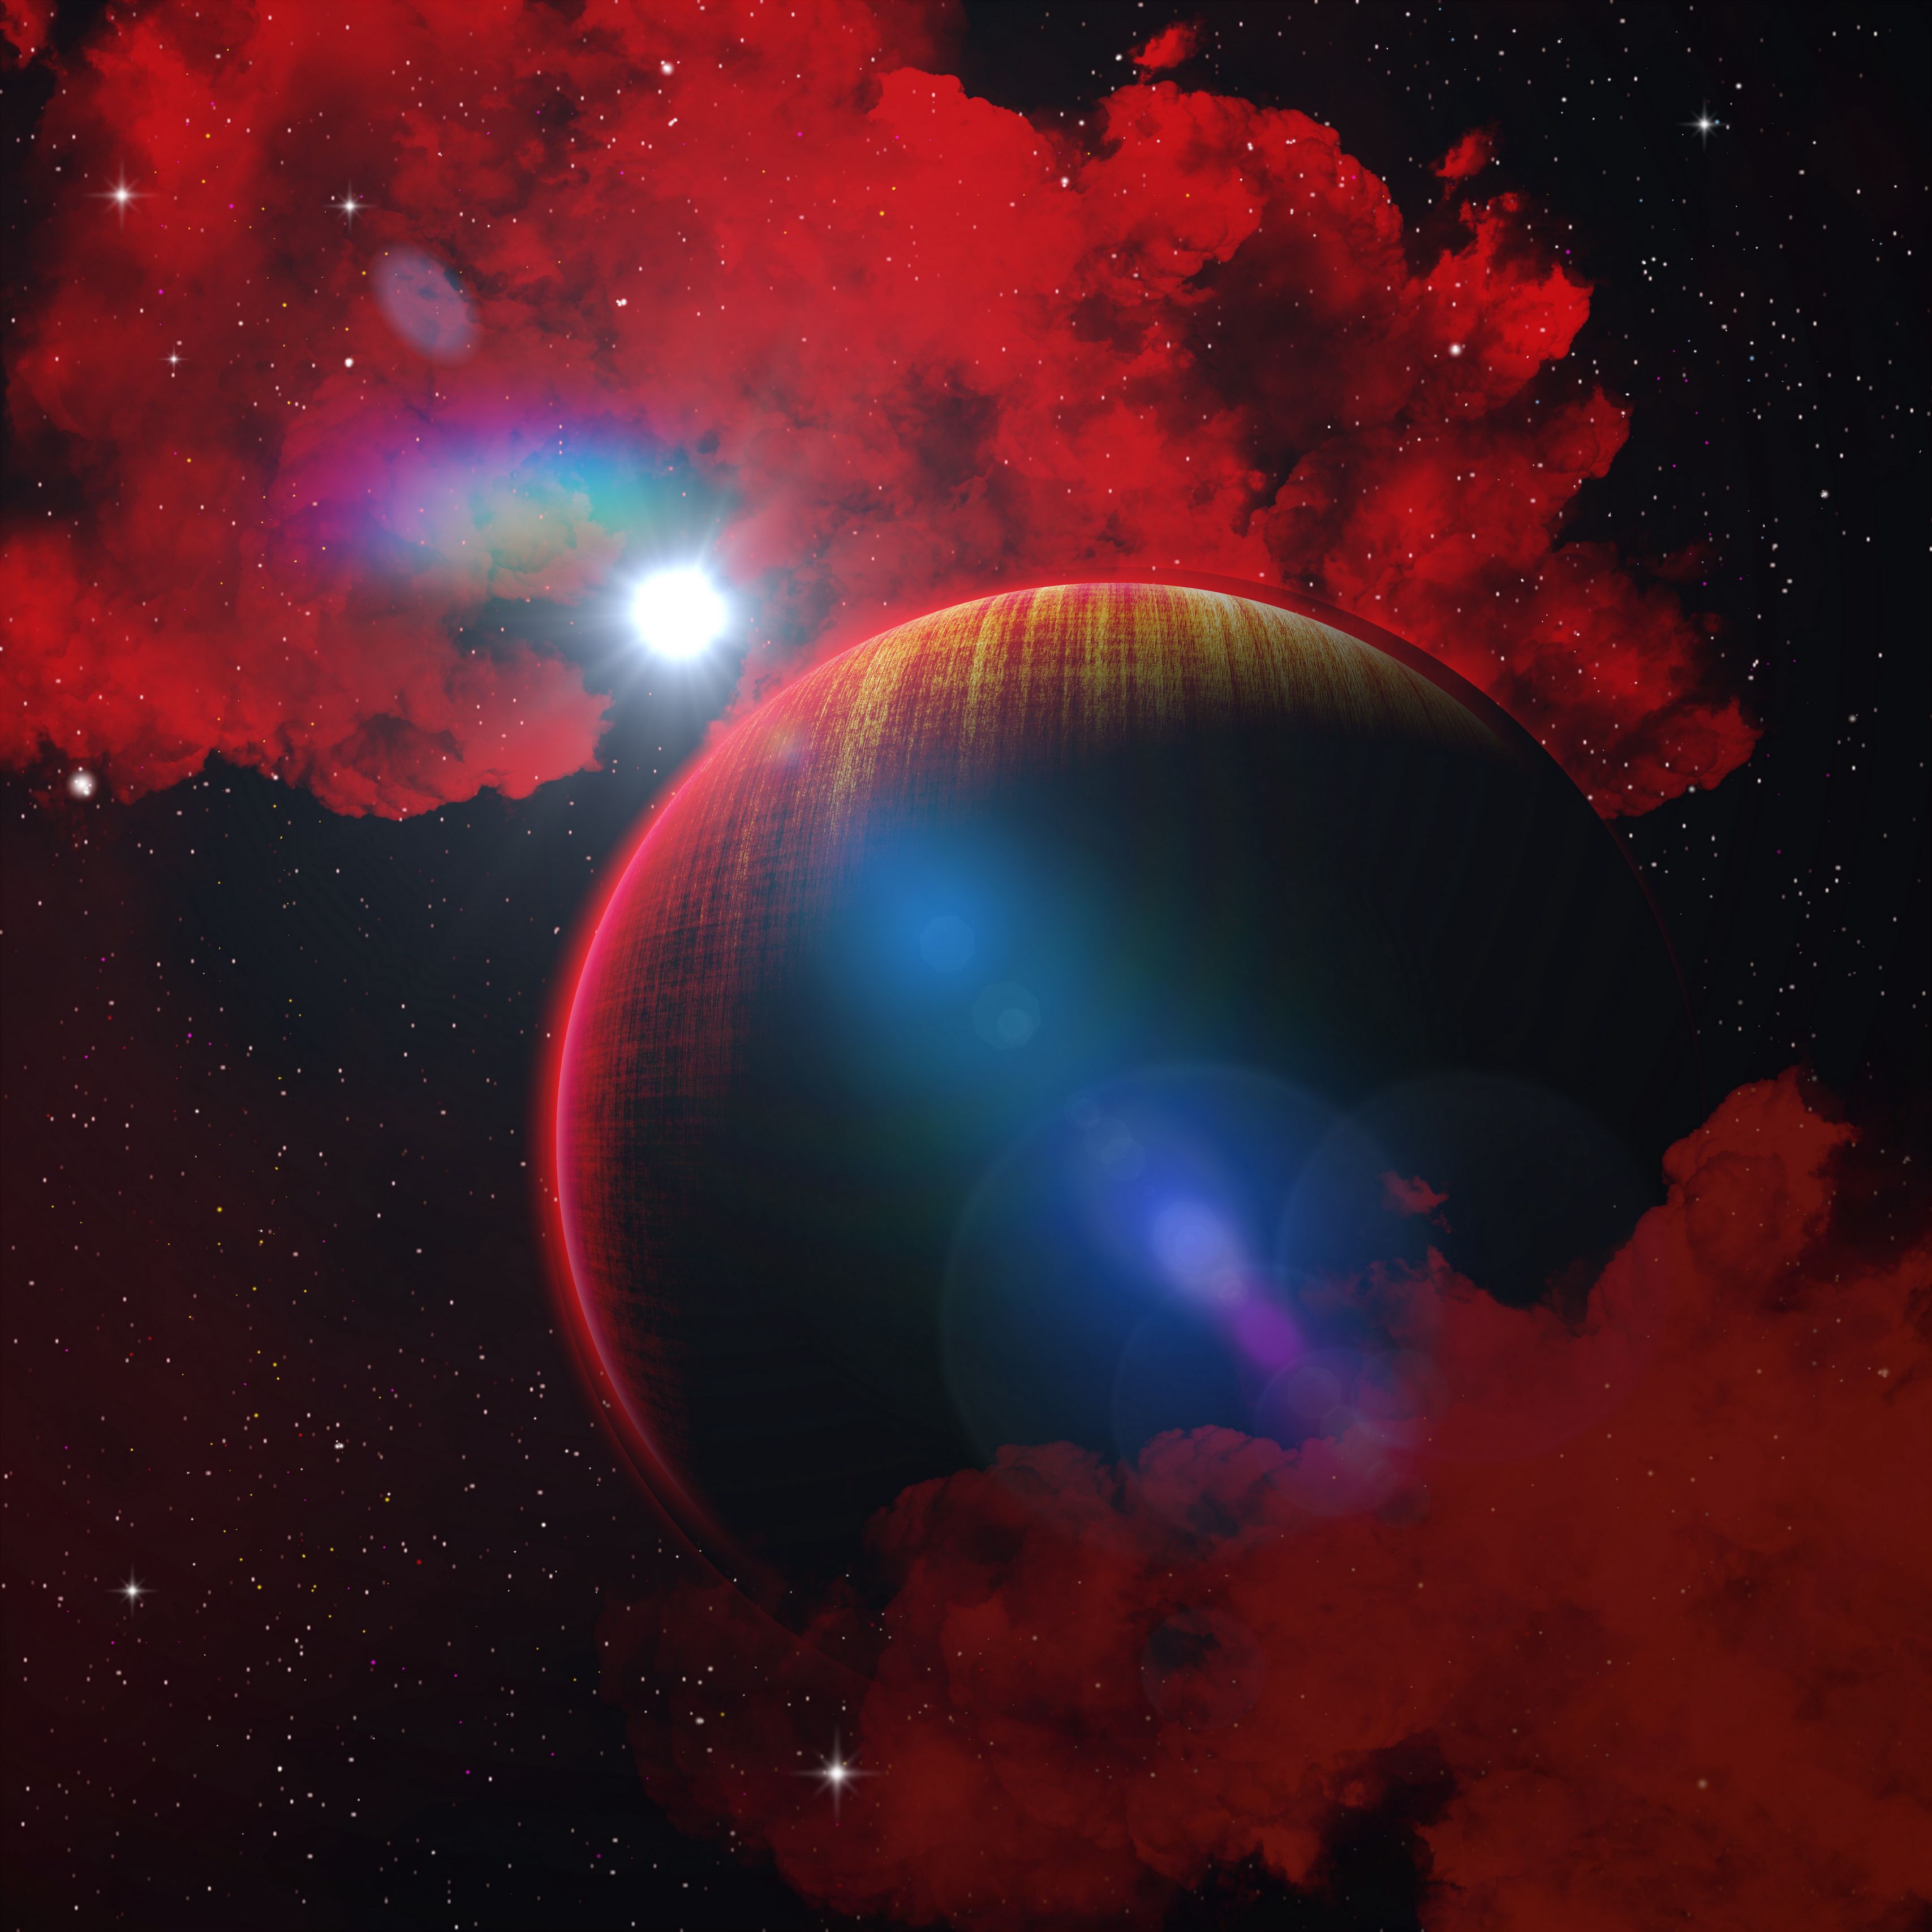 Download wallpaper 3415x3415 planet, red, fantasy, star, space ipad pro 12.9 retina for parallax HD background